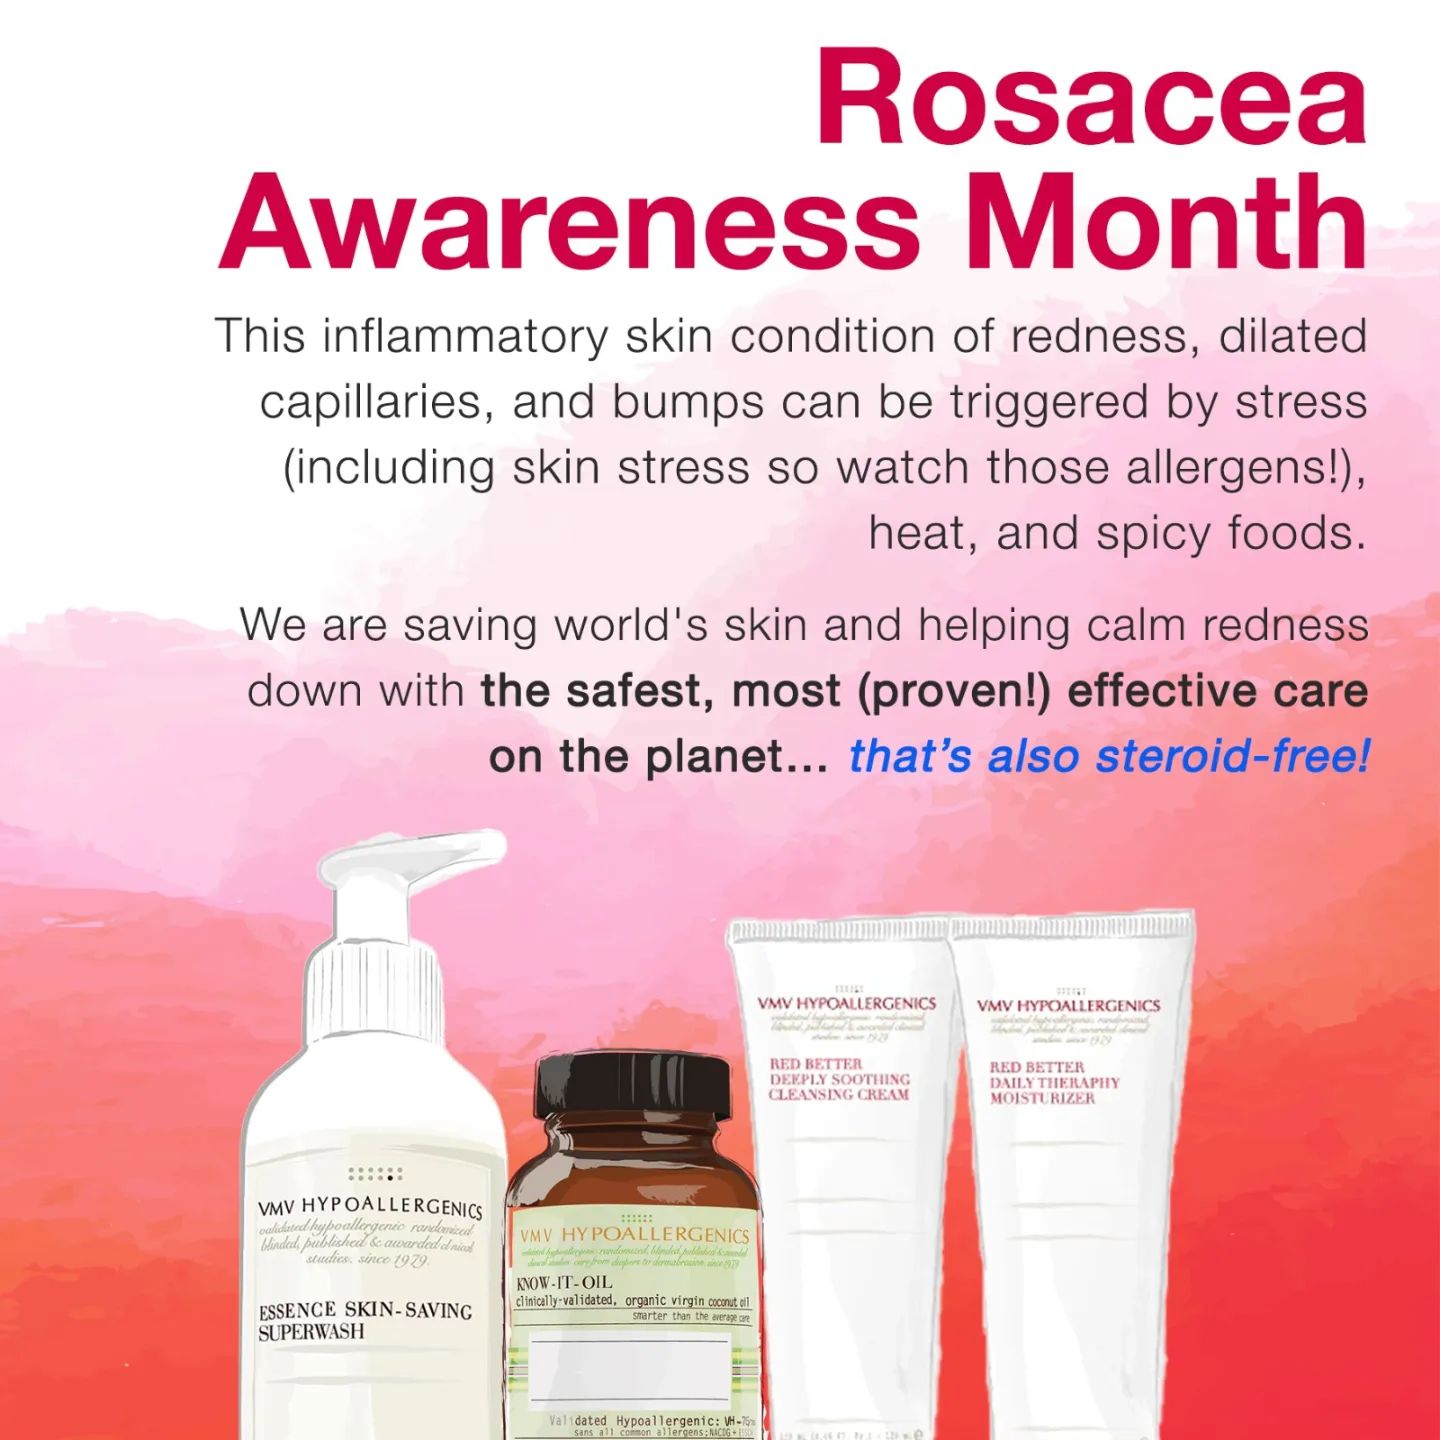 It's Rosacea Awareness Month! ❤️

Turn Woe into Glow! ✨ Learn how to manage Rosacea plus other possible treatments at VMV Skin Research Centre+Clinics!

📲 Book an appointment today! Call us: 09176230528 / 09178549485
📍Or visit VSRC: 117 C. Palanca St., Legaspi Village, Makati City!